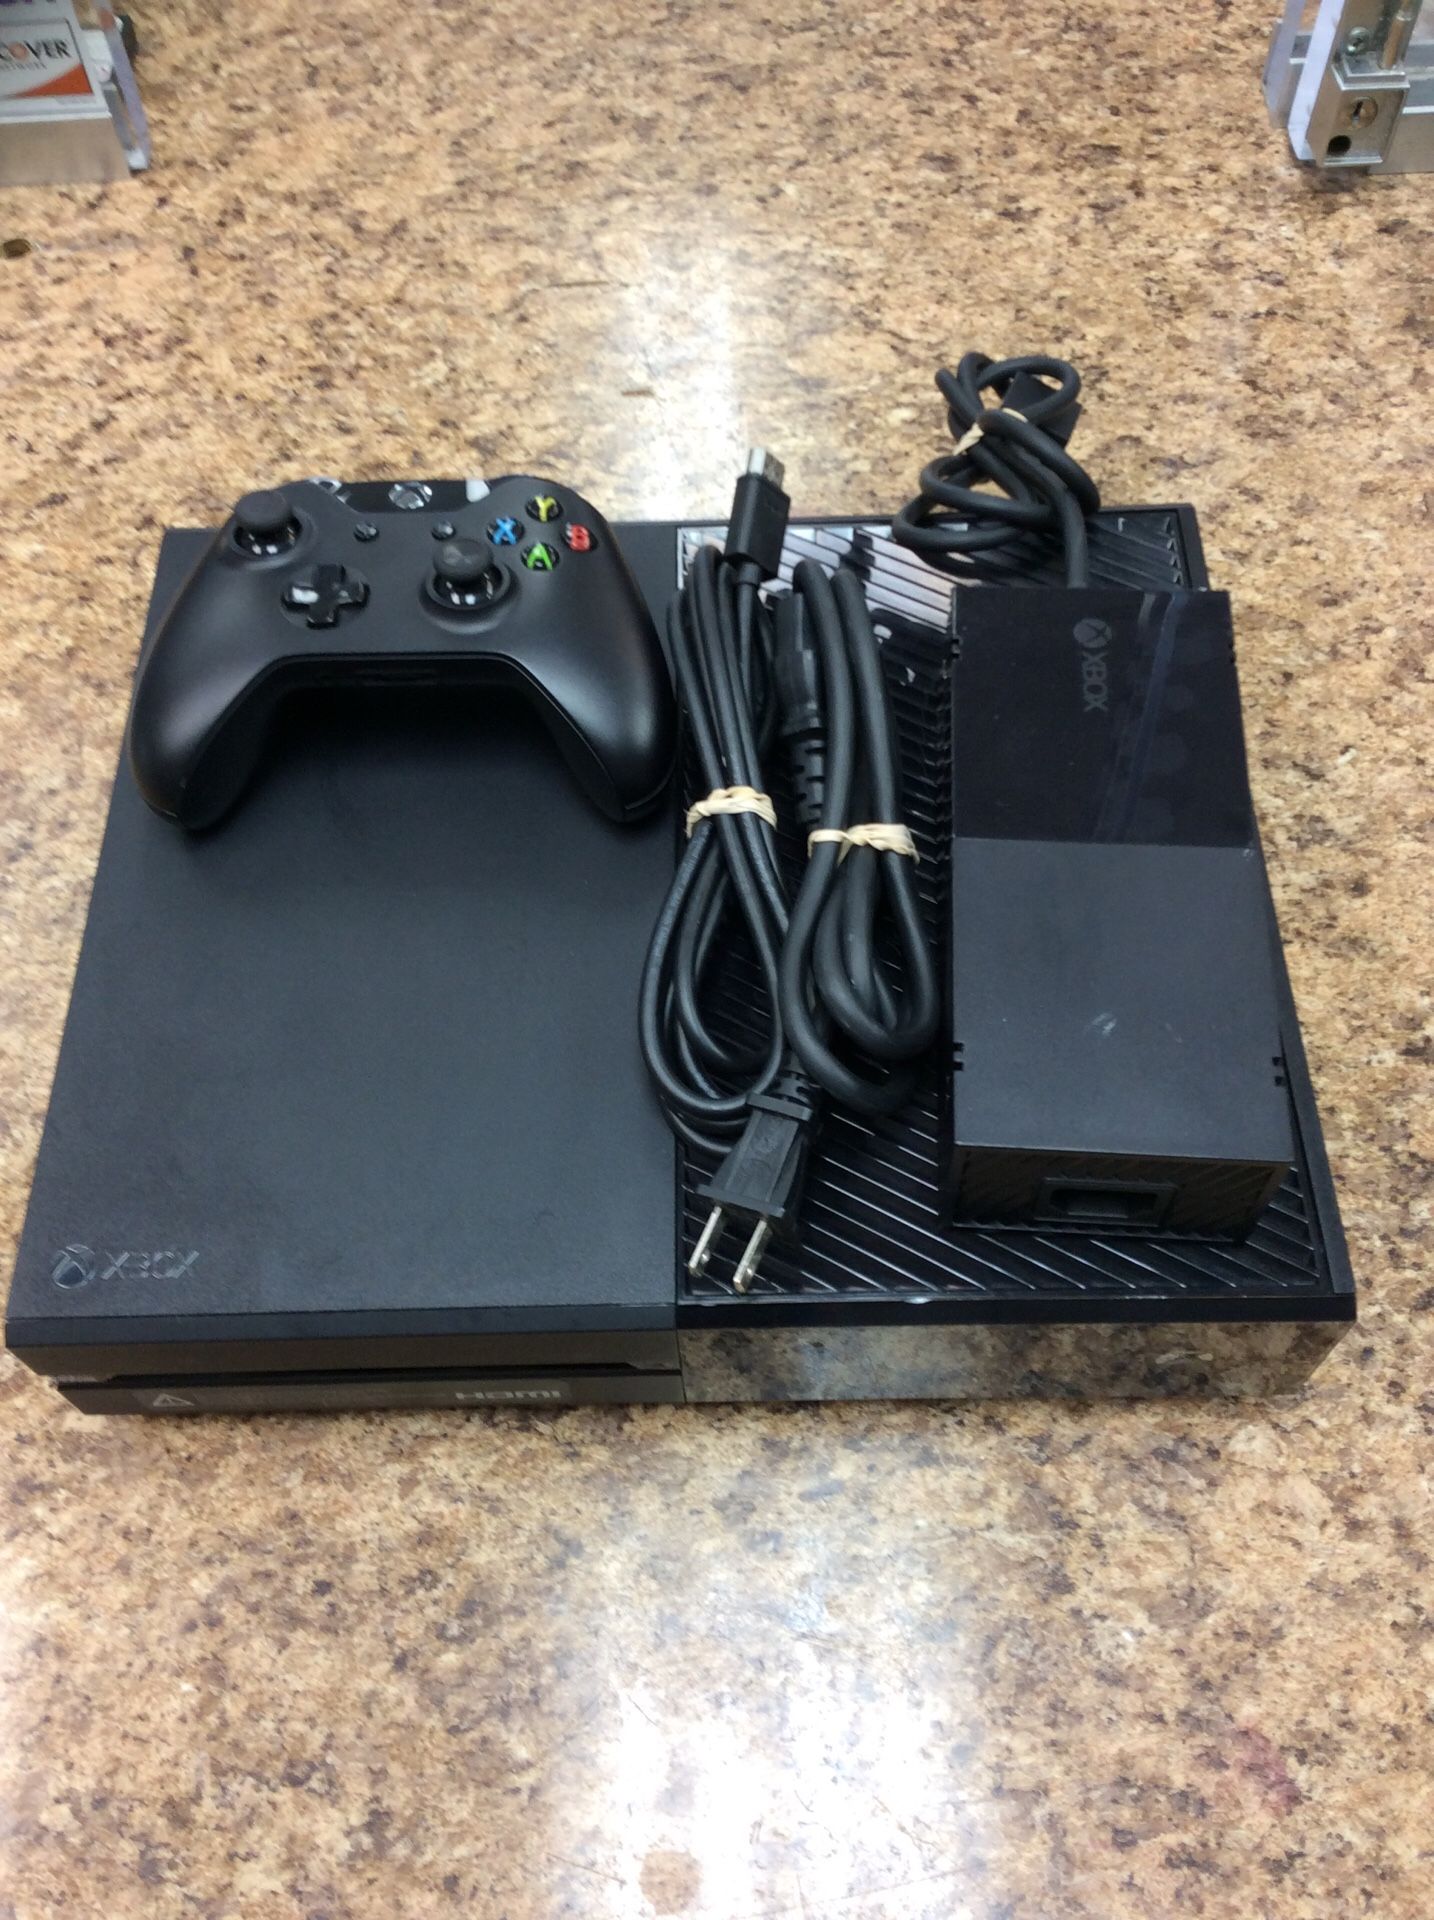 Xbox one with controller hdmi and power cords